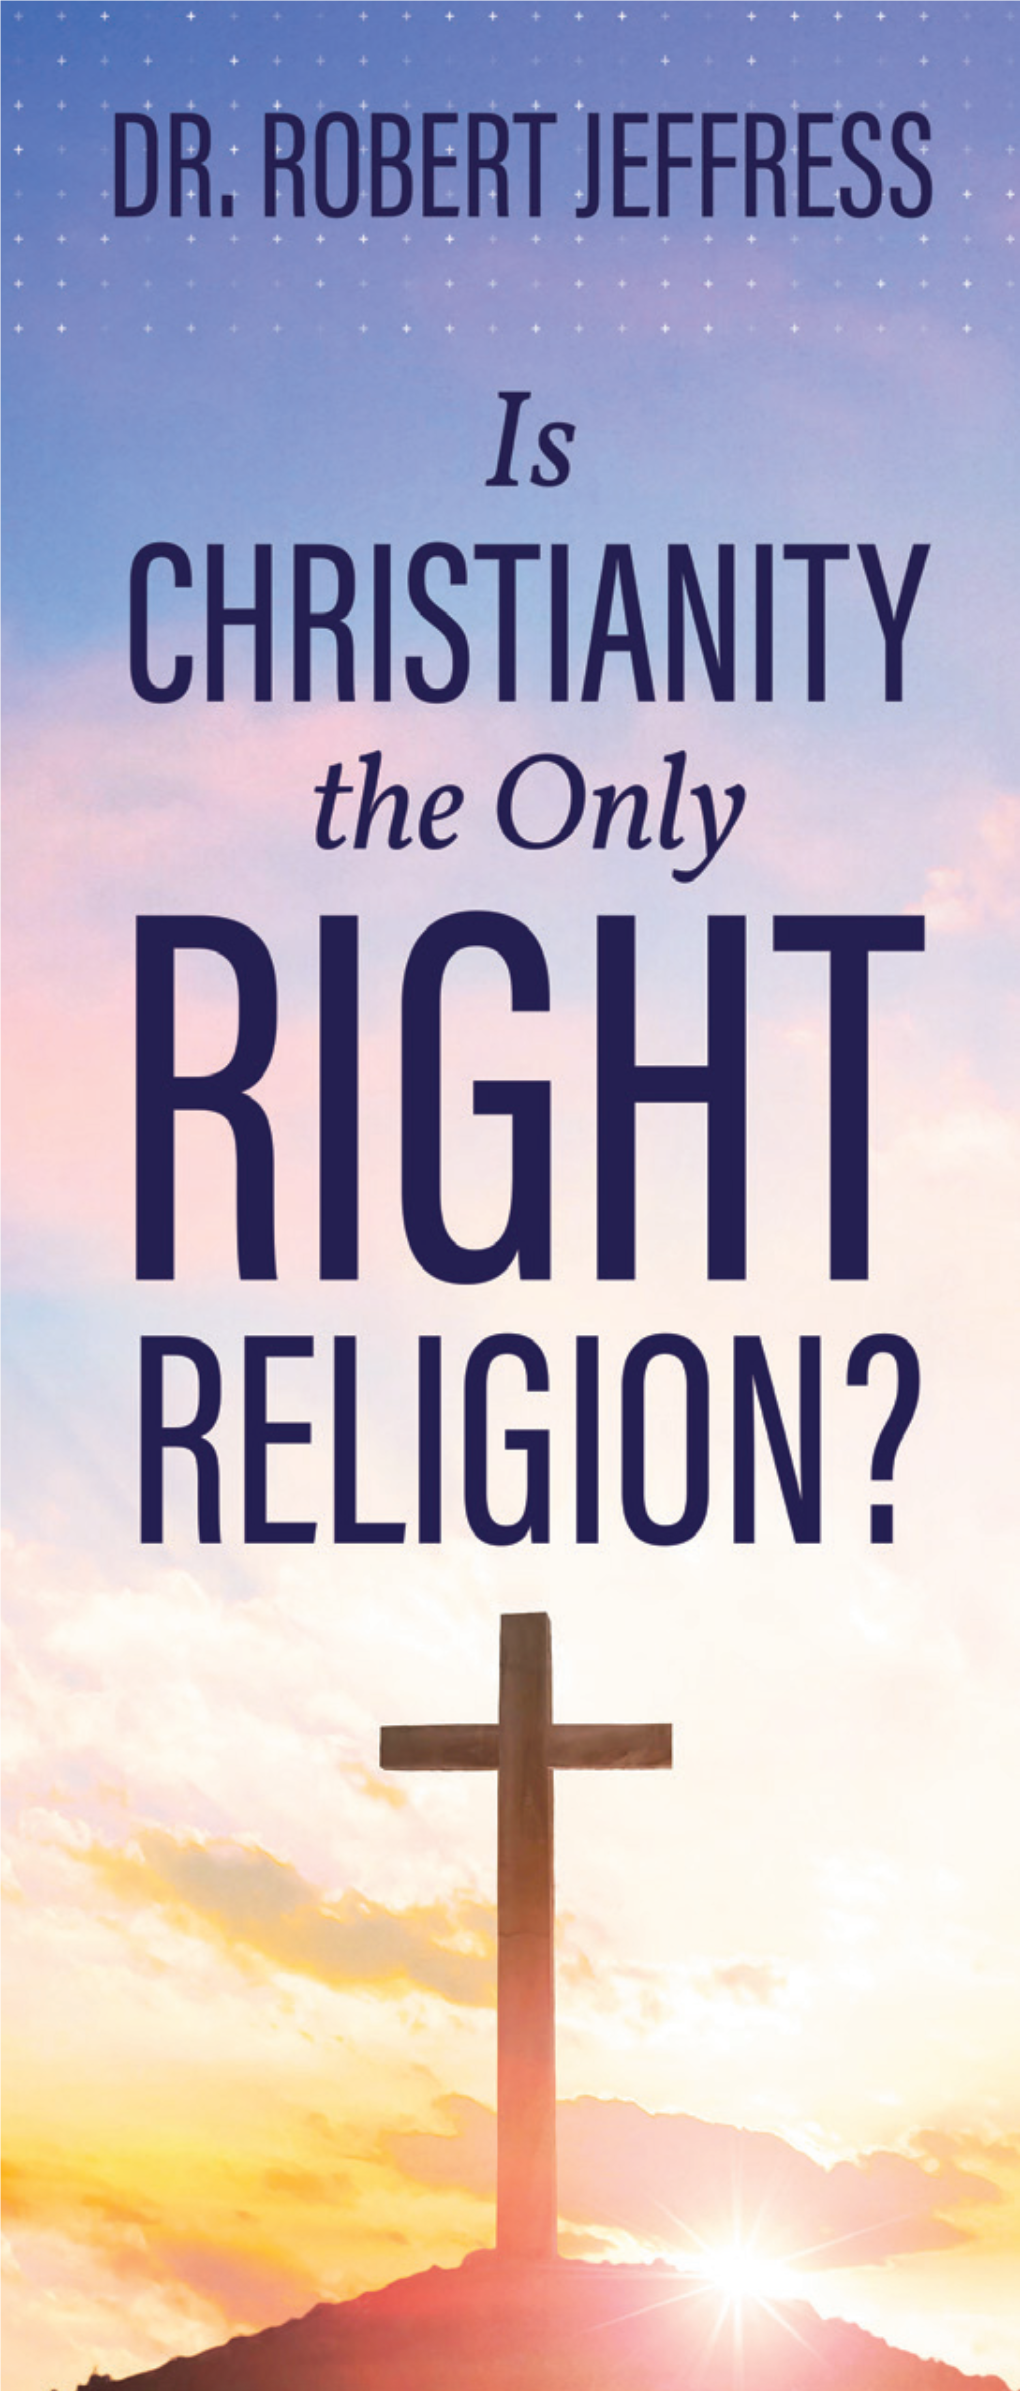 Is Christianity the Only Right Religion?